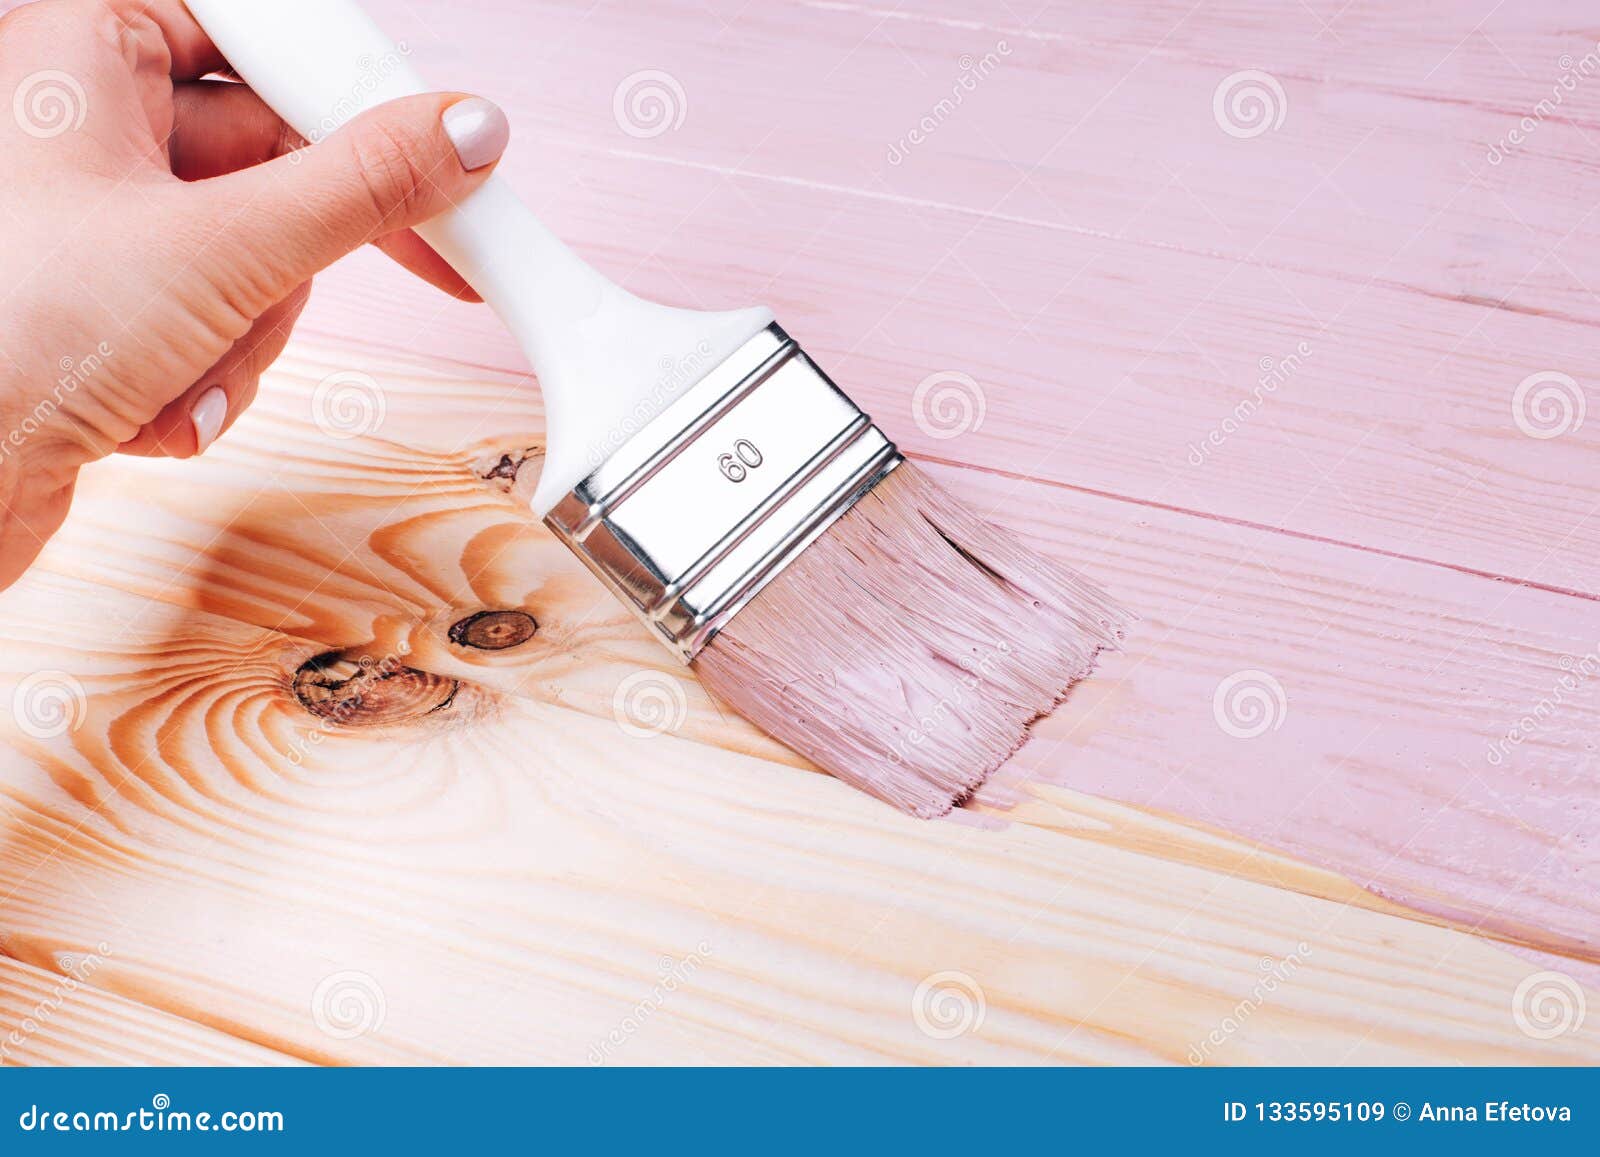 Woman S Hand With White Brush Applying Pink Paint On Wooden